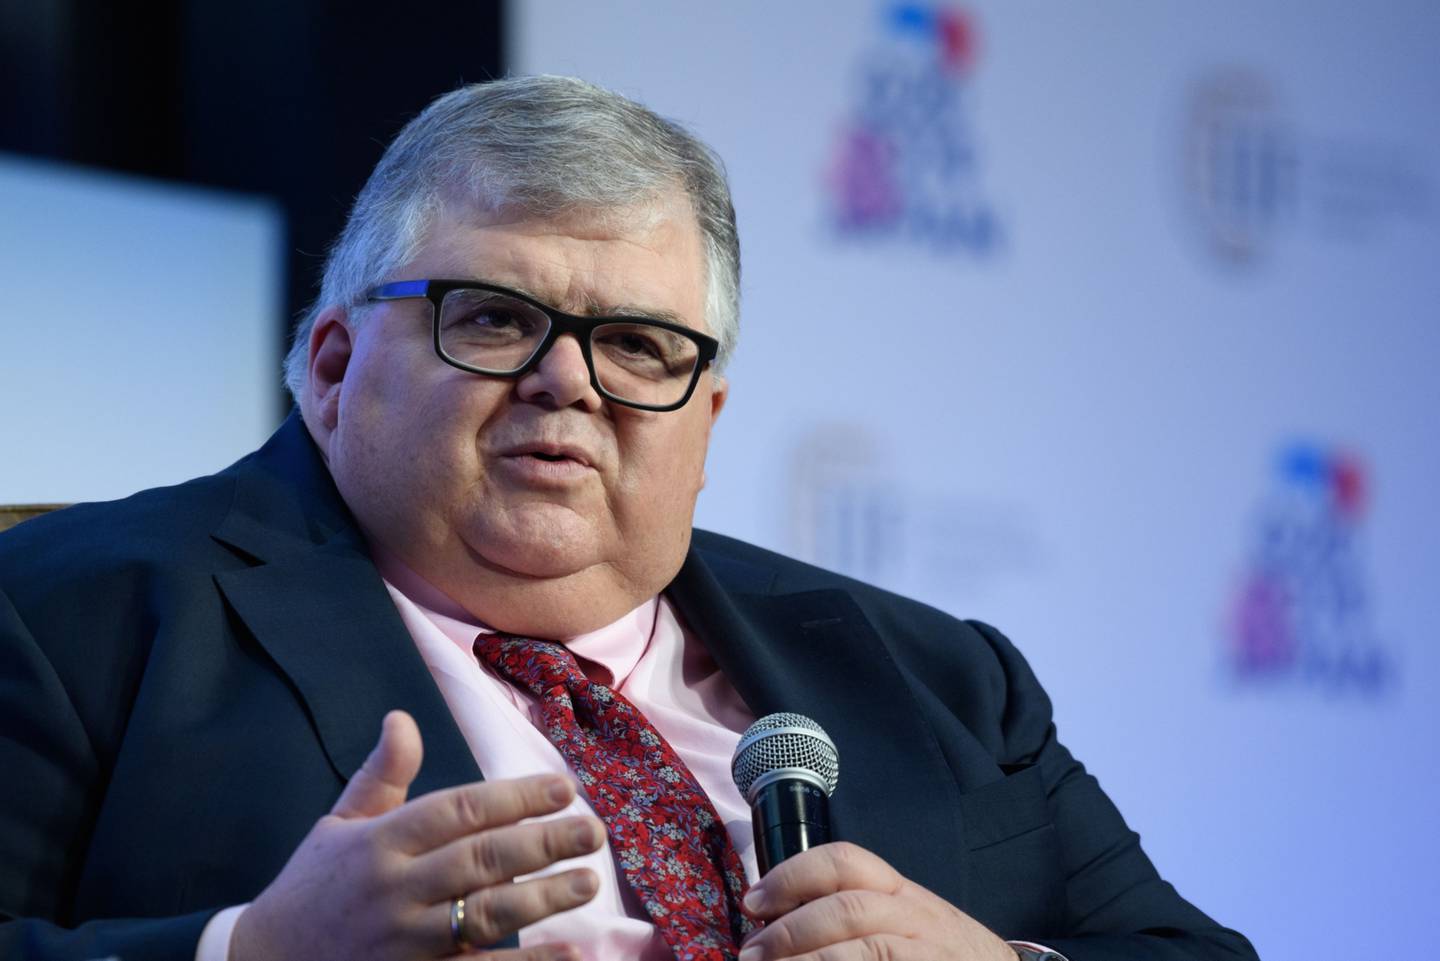 Agustin Carstens, chief executive officer of the Bank for International Settlements, speaks during the Institute of International Finance (IIF) Spring Membership Meeting in Tokyo, Japan, on Thursday, June 6, 2019. Bank of Japan Governor Haruhiko Kuroda says the most important role of financial regulation and supervision is to address market failures. Photographer: Akio Kon/Bloombergdfd